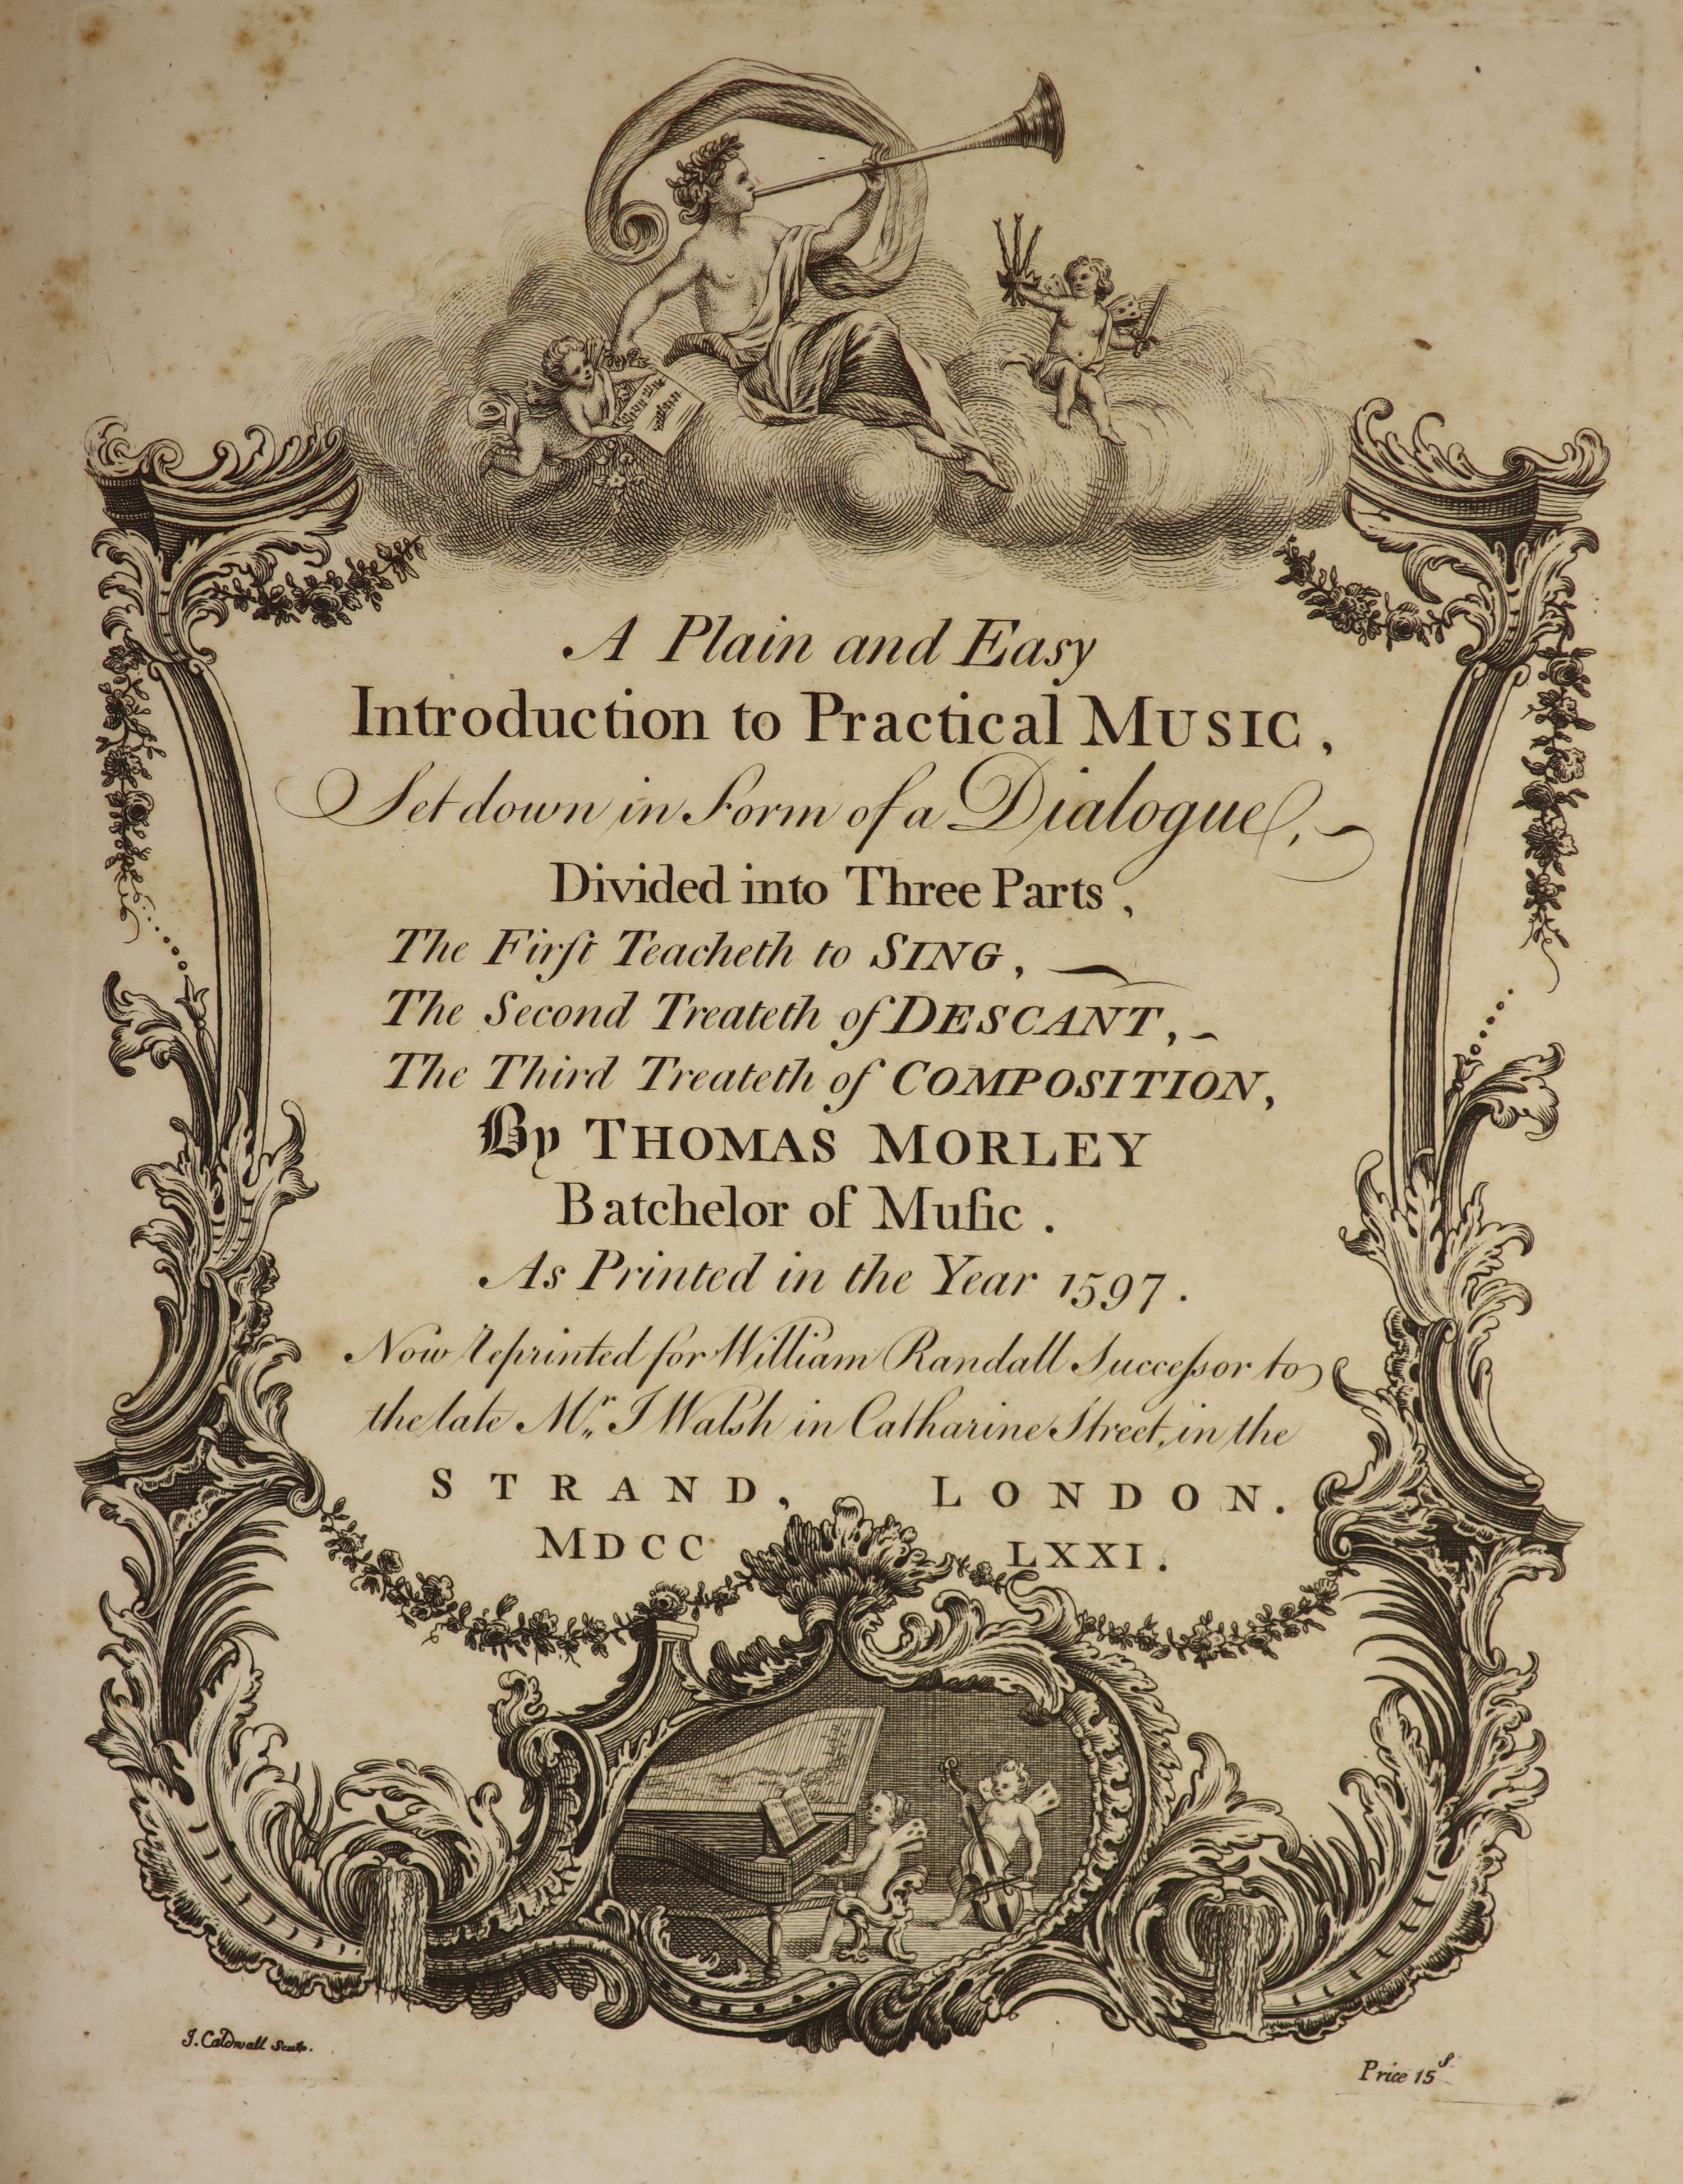 Morley, Thomas - A plain and Easy Introduction to Practical Music, set down in form of a dialogue… Now reprinted for William Randall… Pictorial engraved title page. Quarter calf and old marble boards, 4to. William Randal